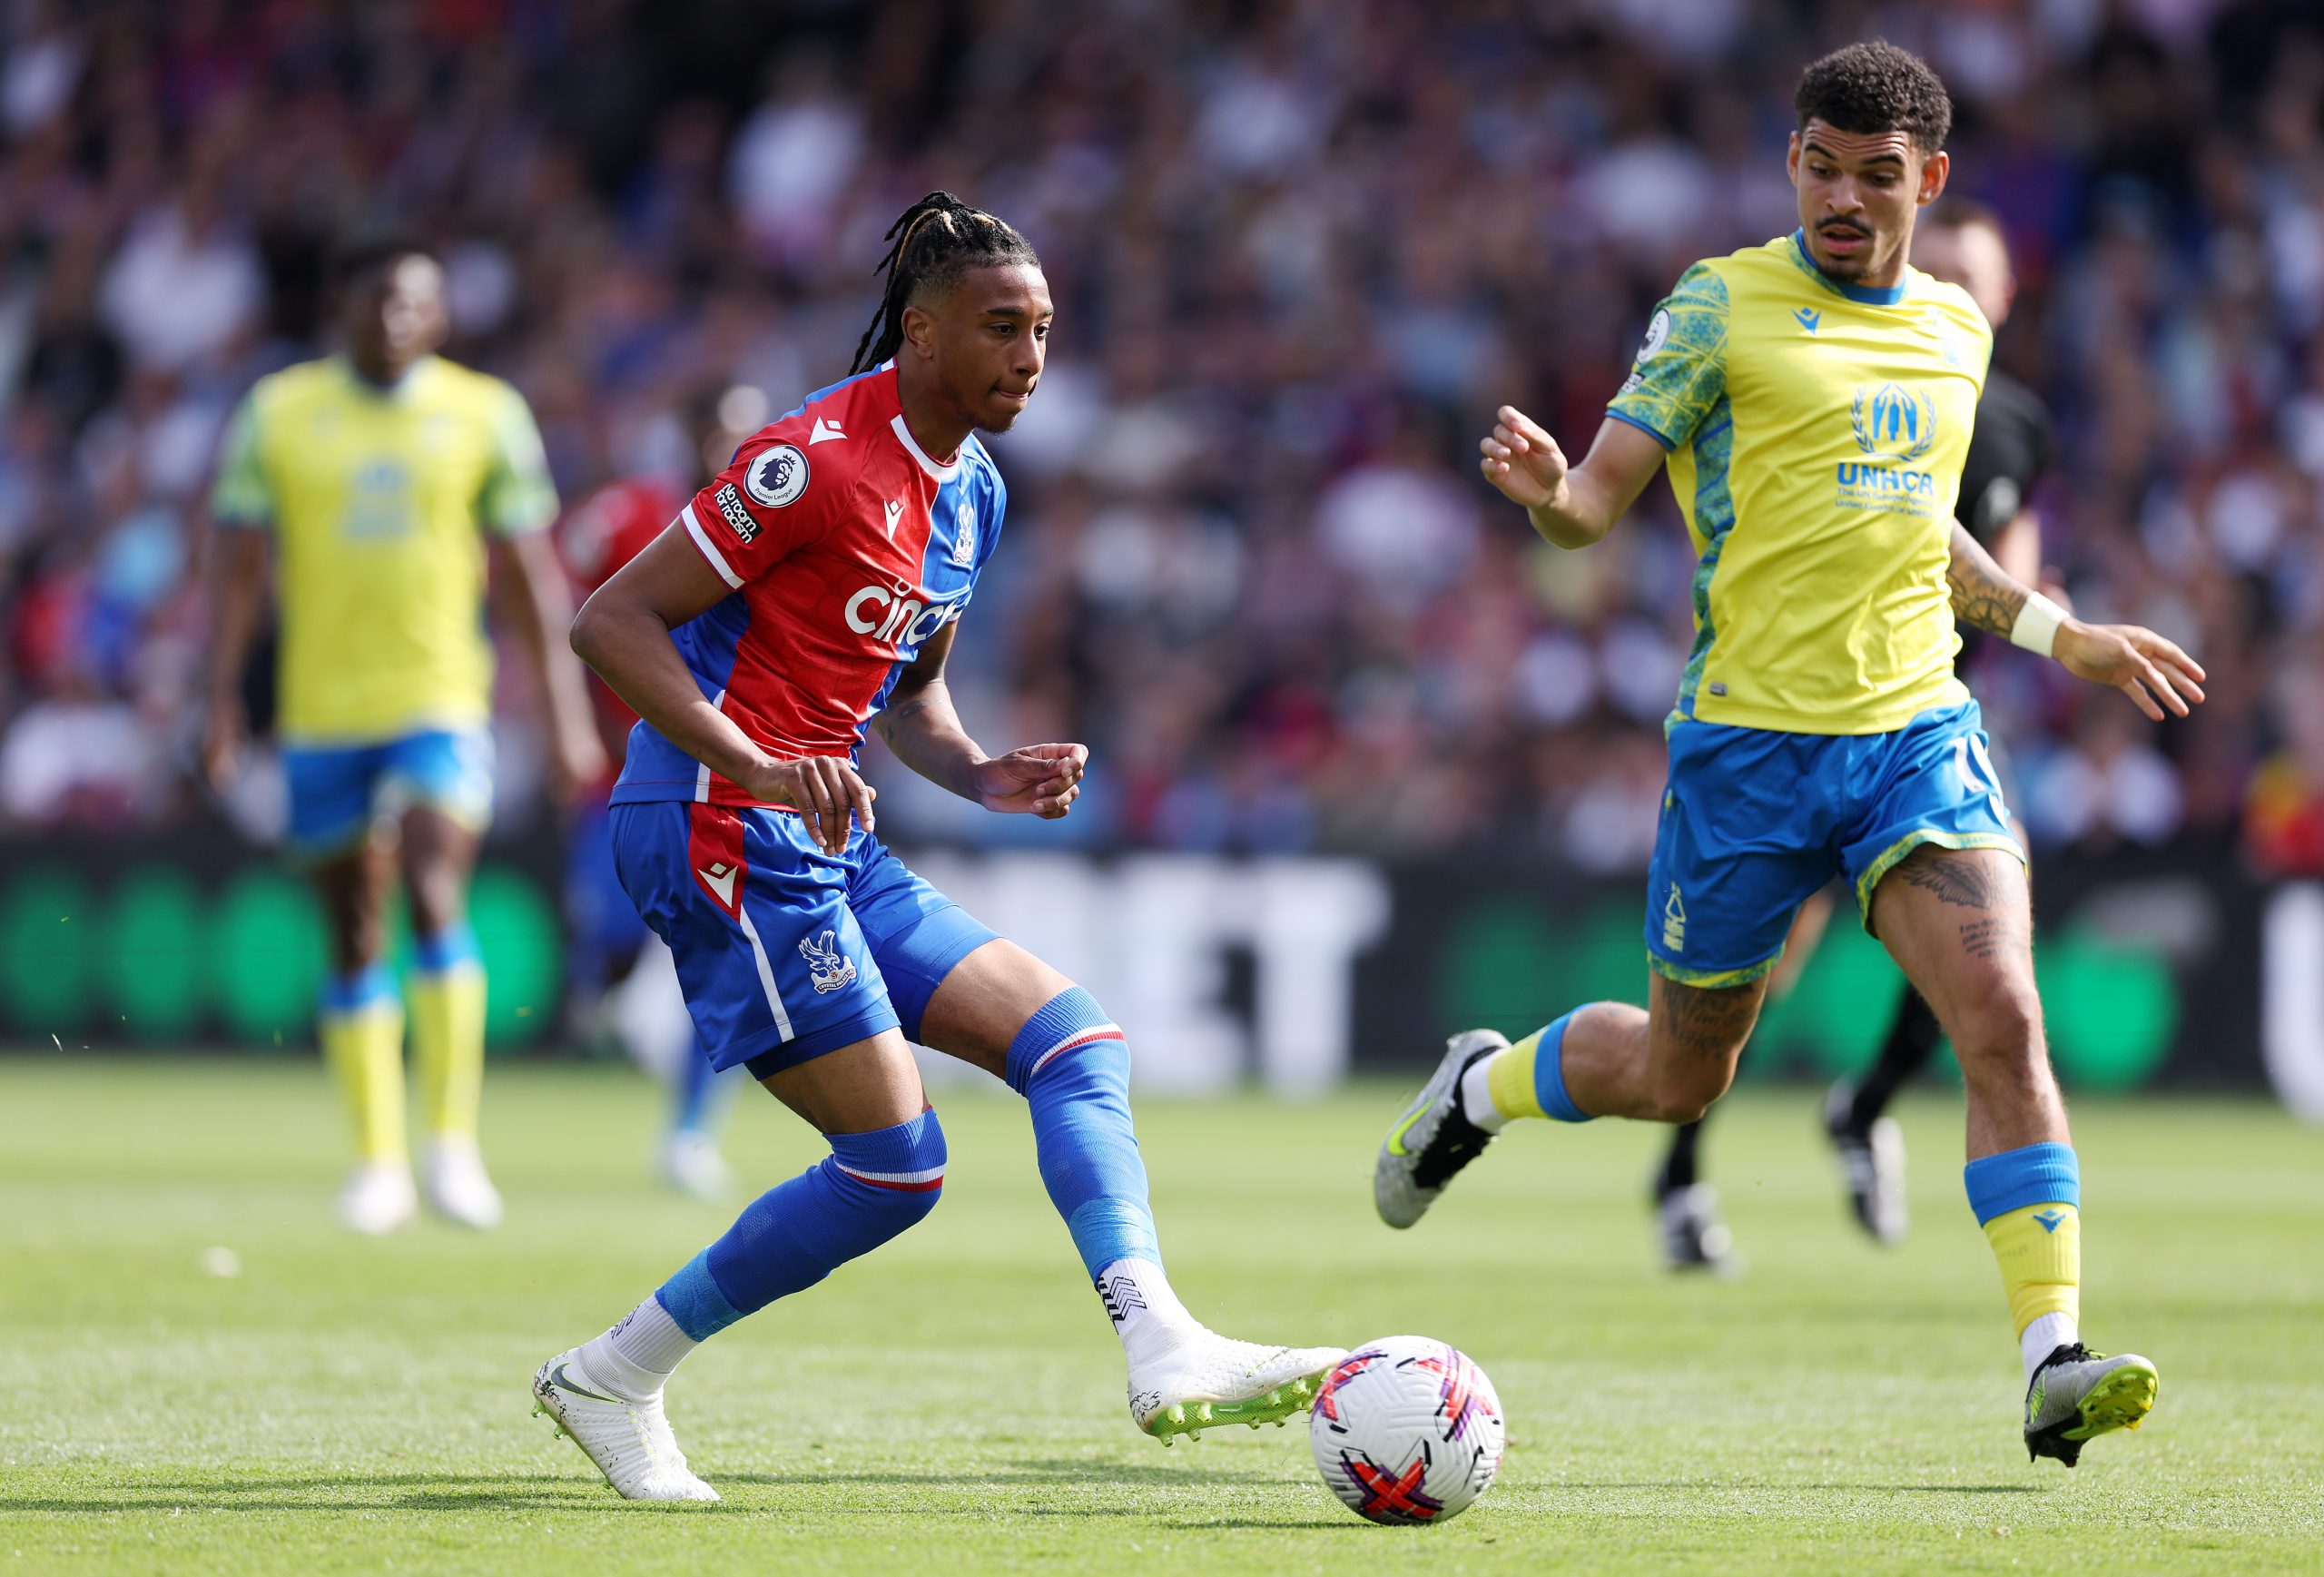 LONDON, ENGLAND - MAY 28: Michael Olise of Crystal Palace holds the ball whilst under pressure from Morgan Gibbs-White of Nottingham Forest during the Premier League match between Crystal Palace and Nottingham Forest at Selhurst Park on May 28, 2023 in London, England. (Photo by Richard Heathcote/Getty Images)